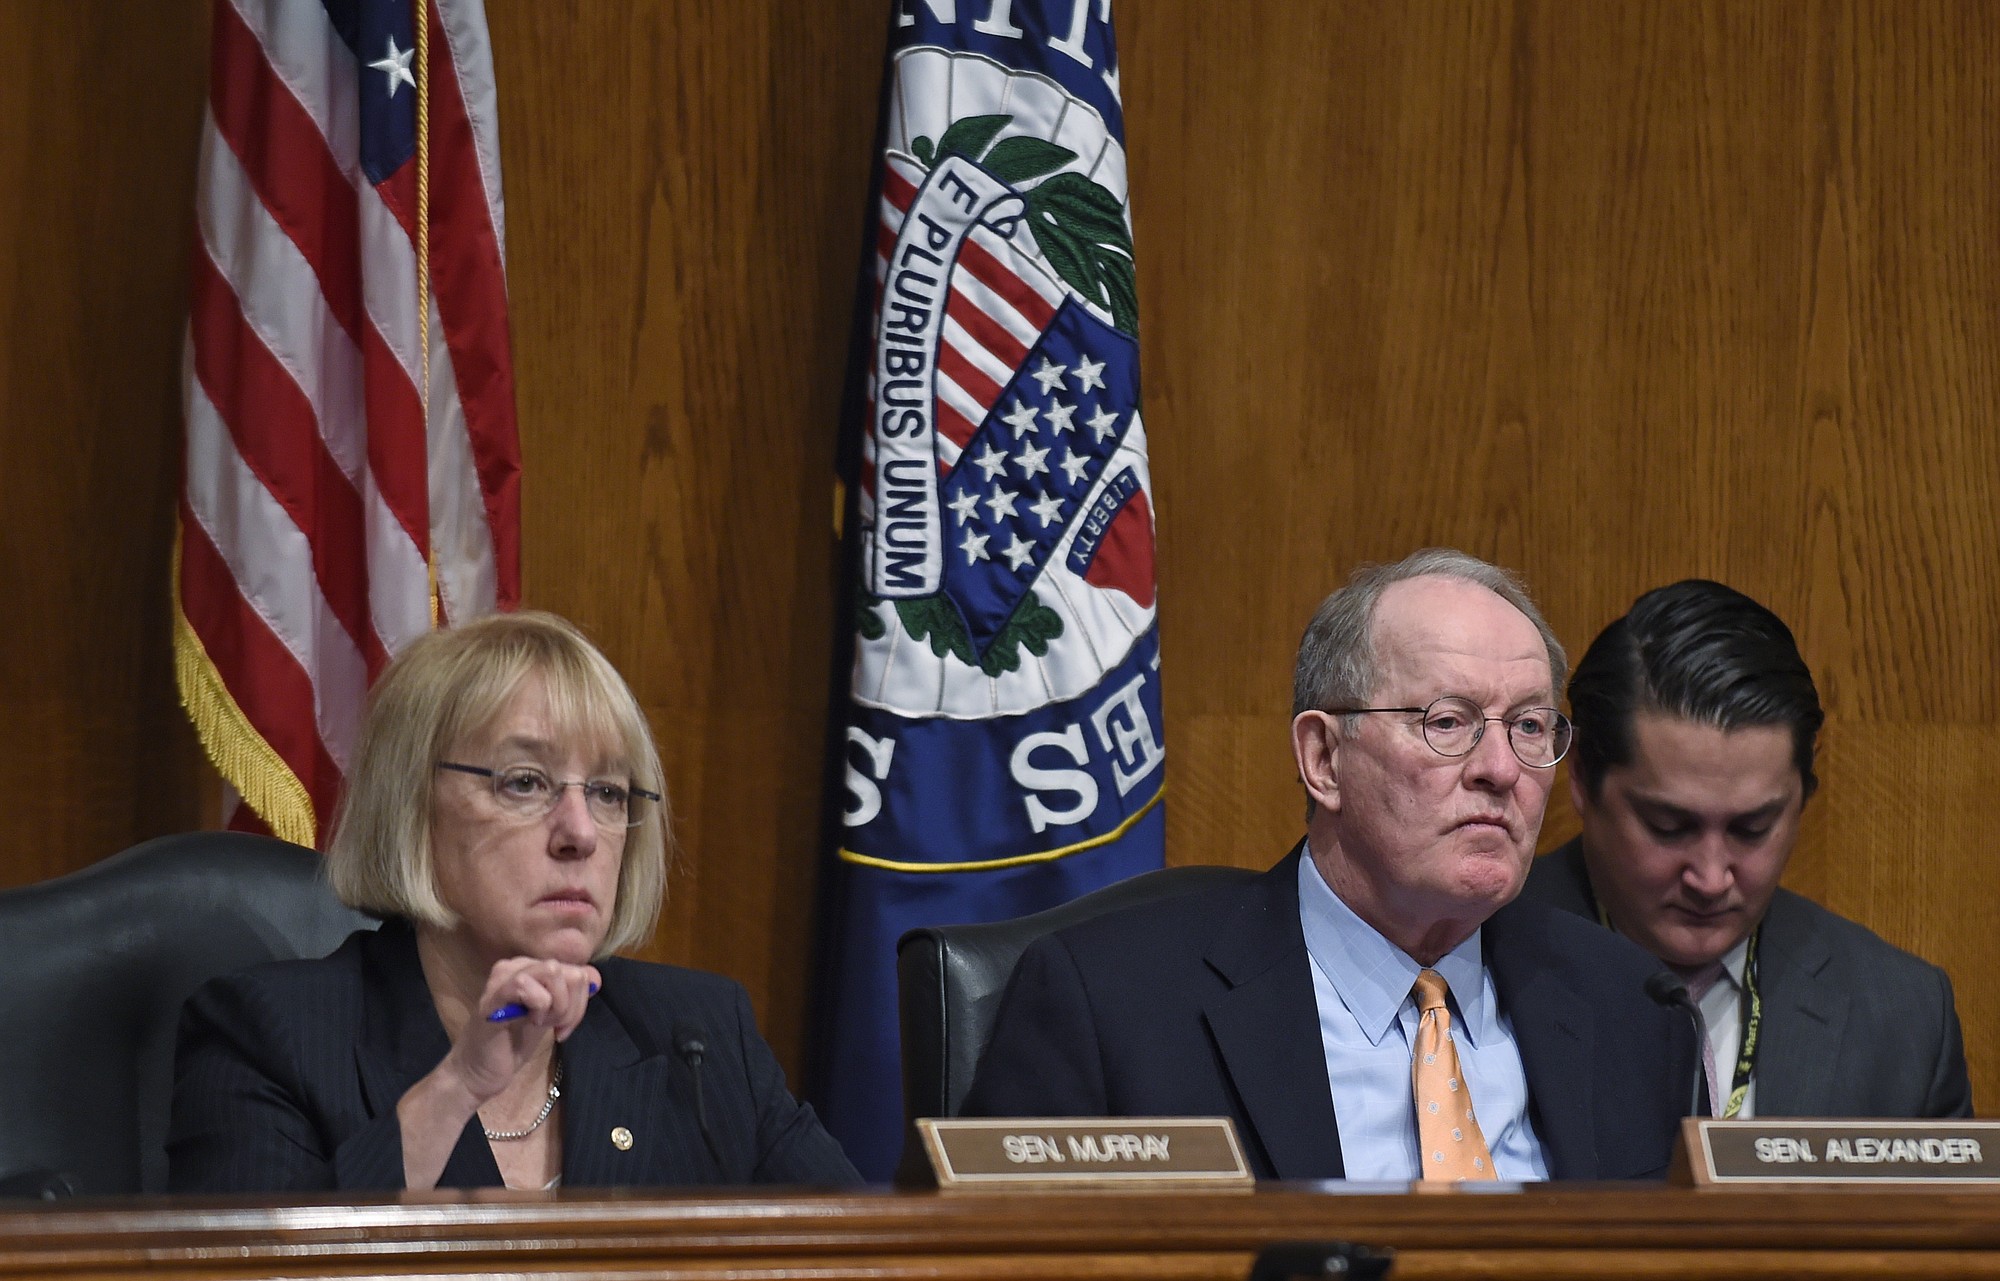 Senate Health, Education, Labor and Pensions Committee Chairman Sen. Lamar Alexander, R-Tenn., sitting next to ranking member Sen. Patty Murray, D-Wash., listens to testimony Jan. 21 during a hearing looking at ways to fix the No Child Left Behind law during a hearing on Capitol Hill in Washington.